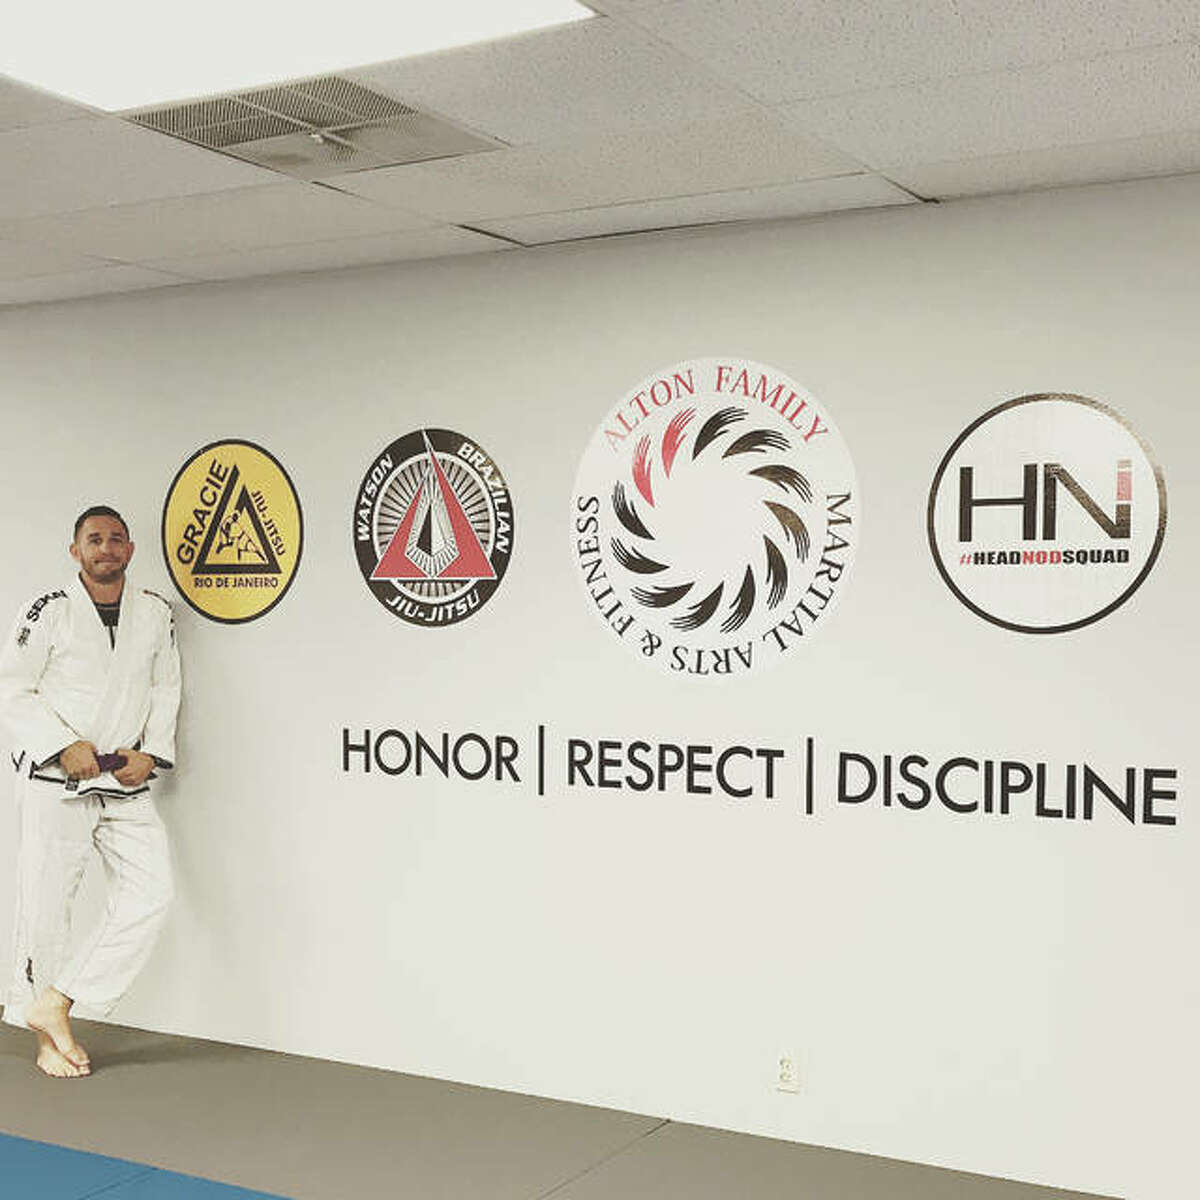 Alton Family Martial Arts and Fitness owner Adam Marburger stands in his newly-renovated space at Nautilus Fitness Center in Alton. Marburger hopes to improve lives through the discipline of martial arts.